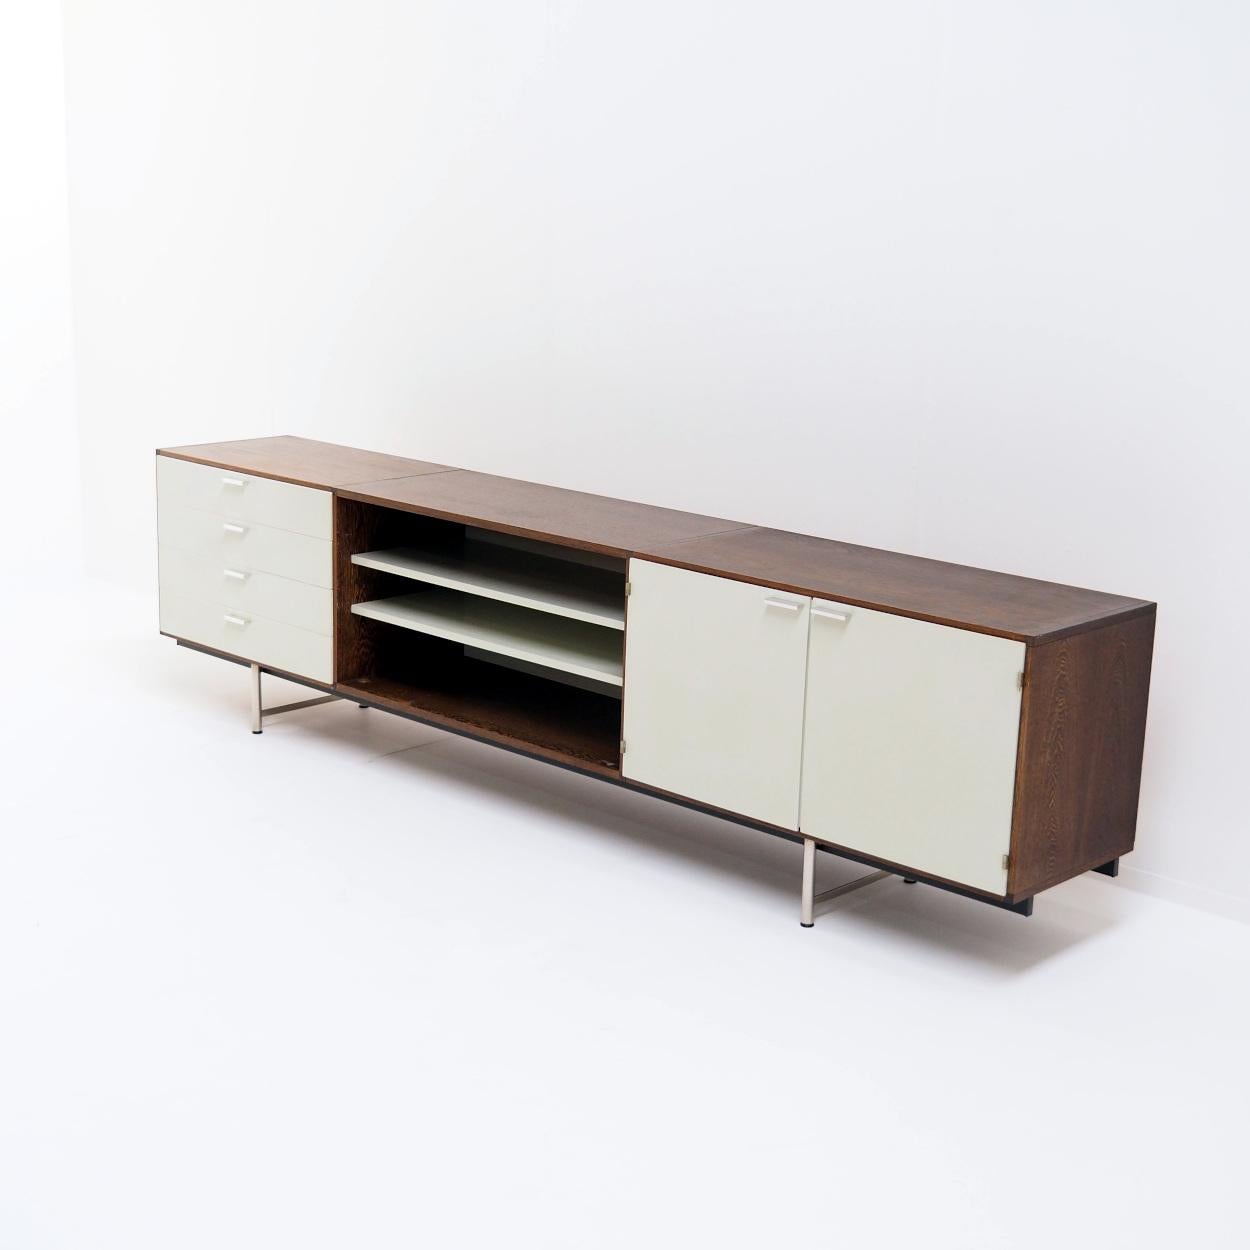 Dutch Sideboard in Wengé and White by Cees Braakman for Pastoe